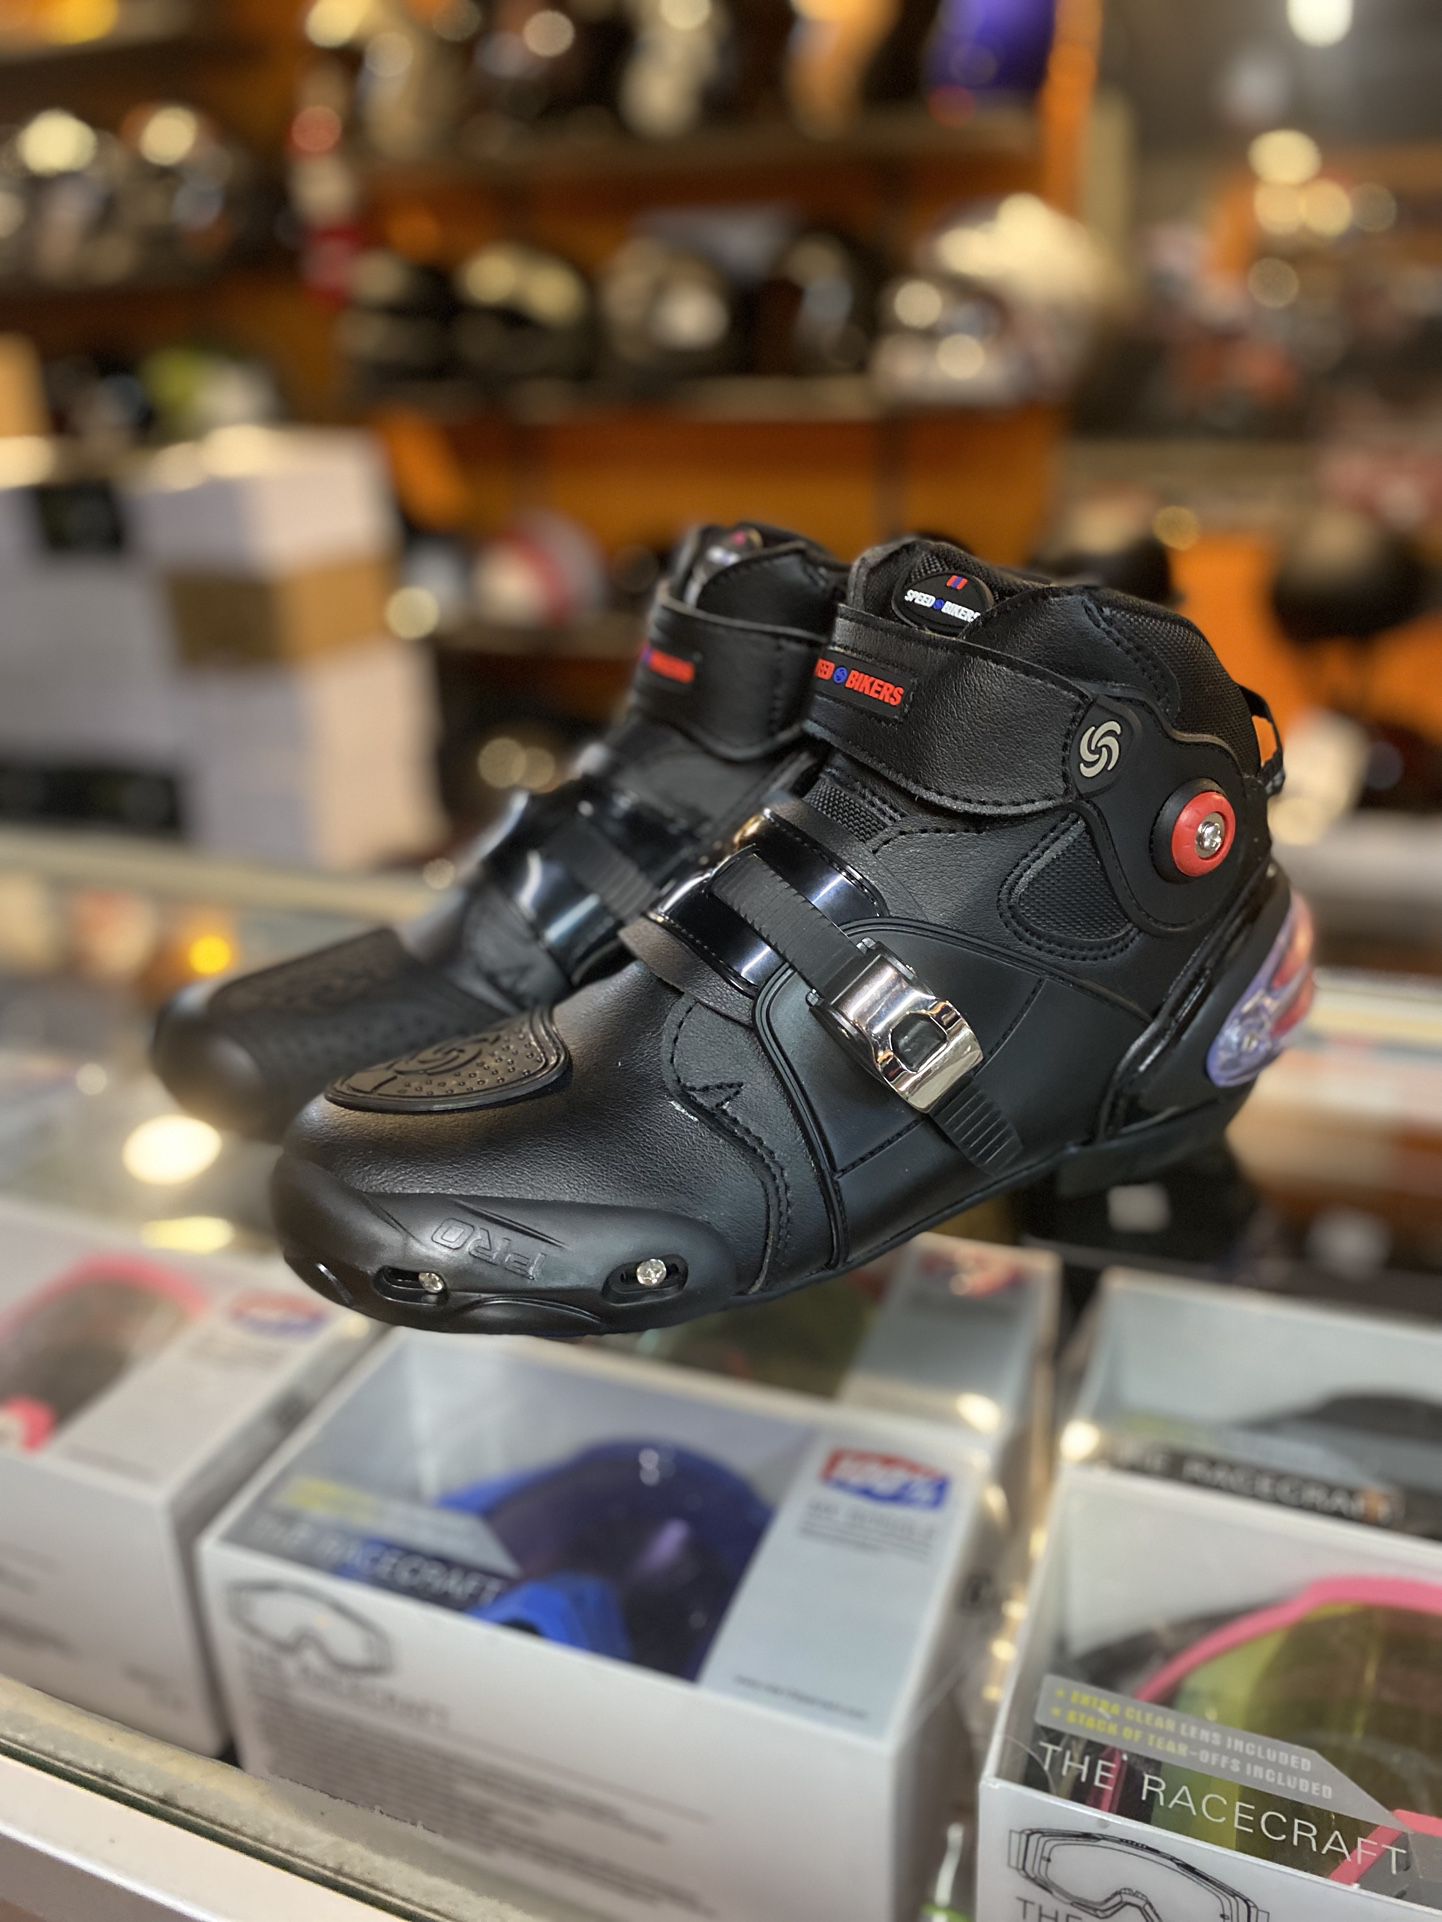 Motorcycle Sport Boots New Short $120